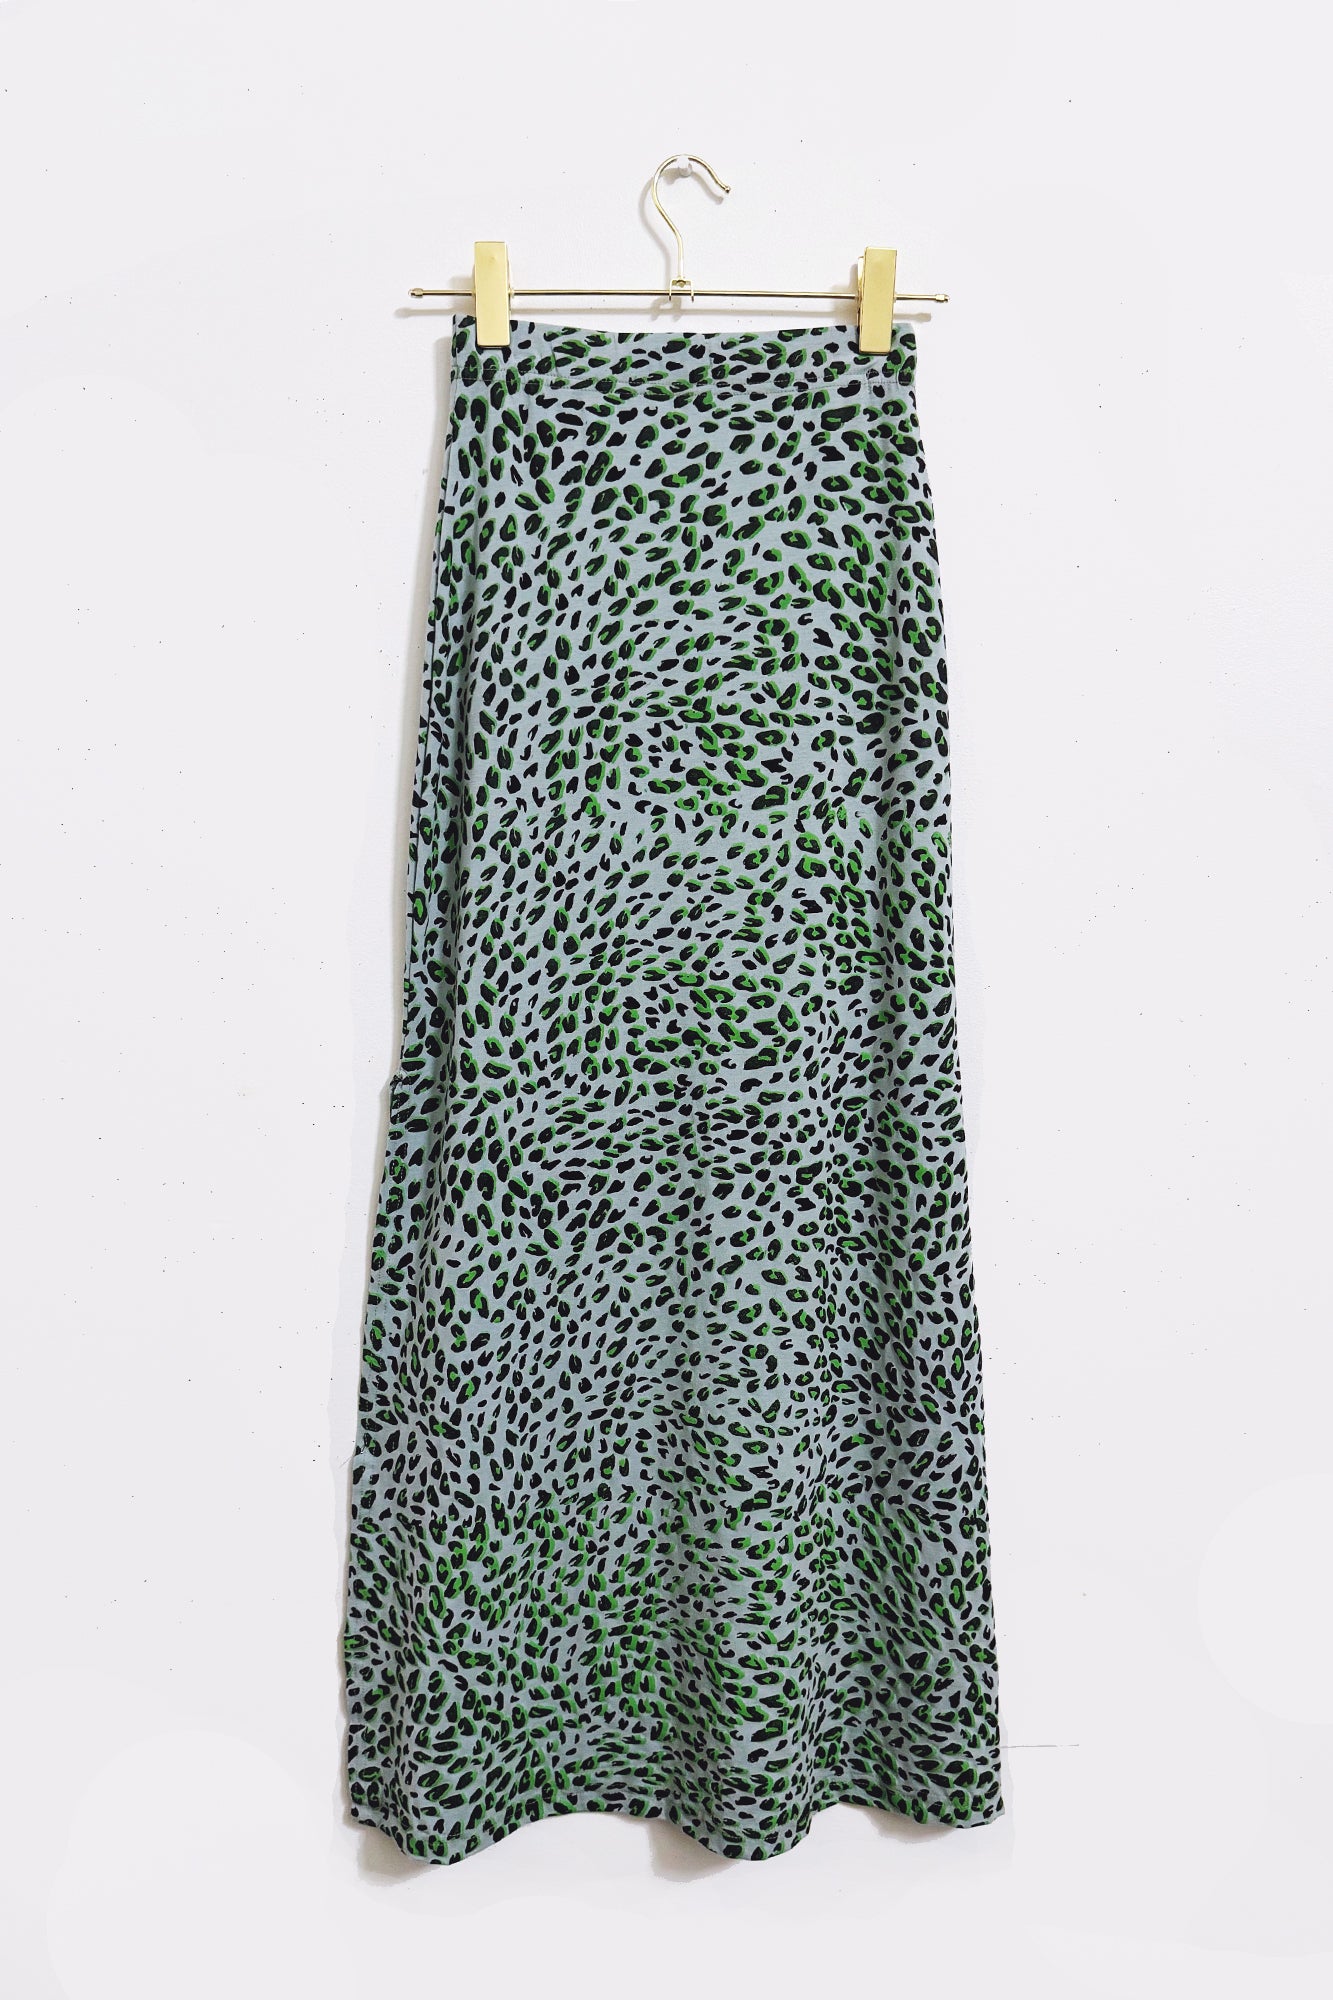 Mint Cheetah Maxi Skirt in XS, Smal and 3X